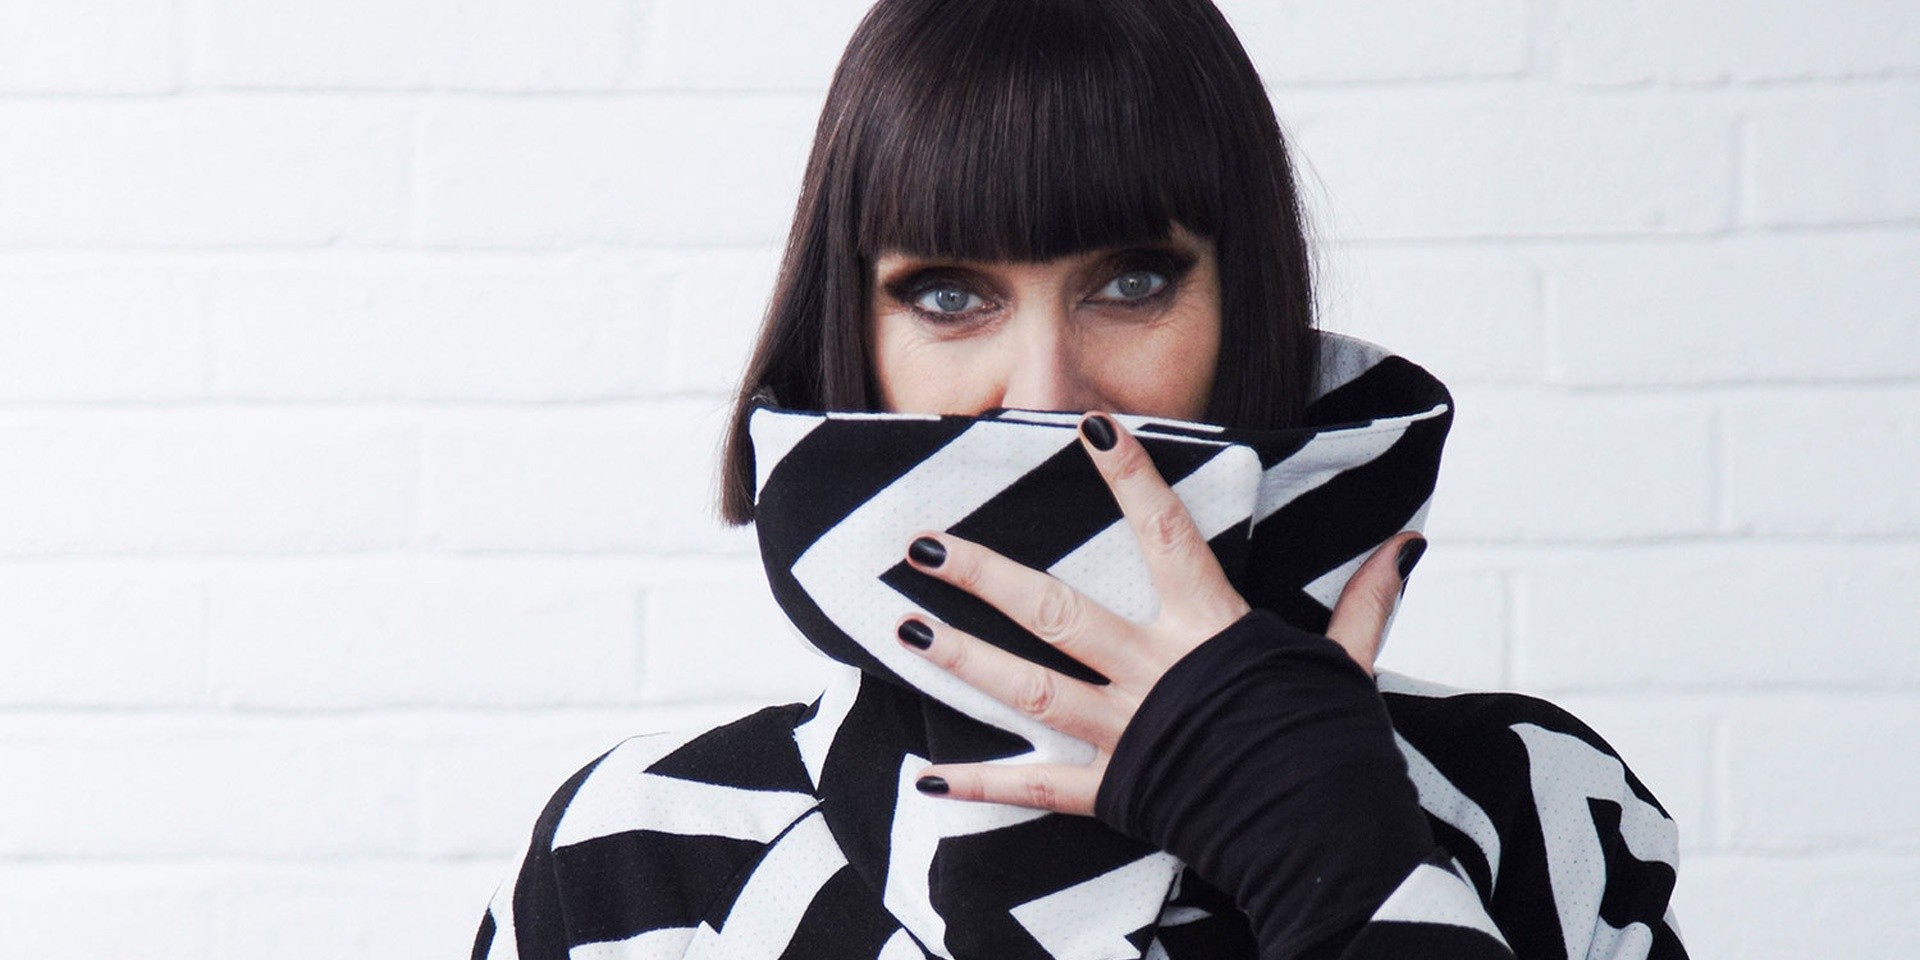 Swing Out Sister to perform in the Philippines – Manila, Davao, Cebu confirmed